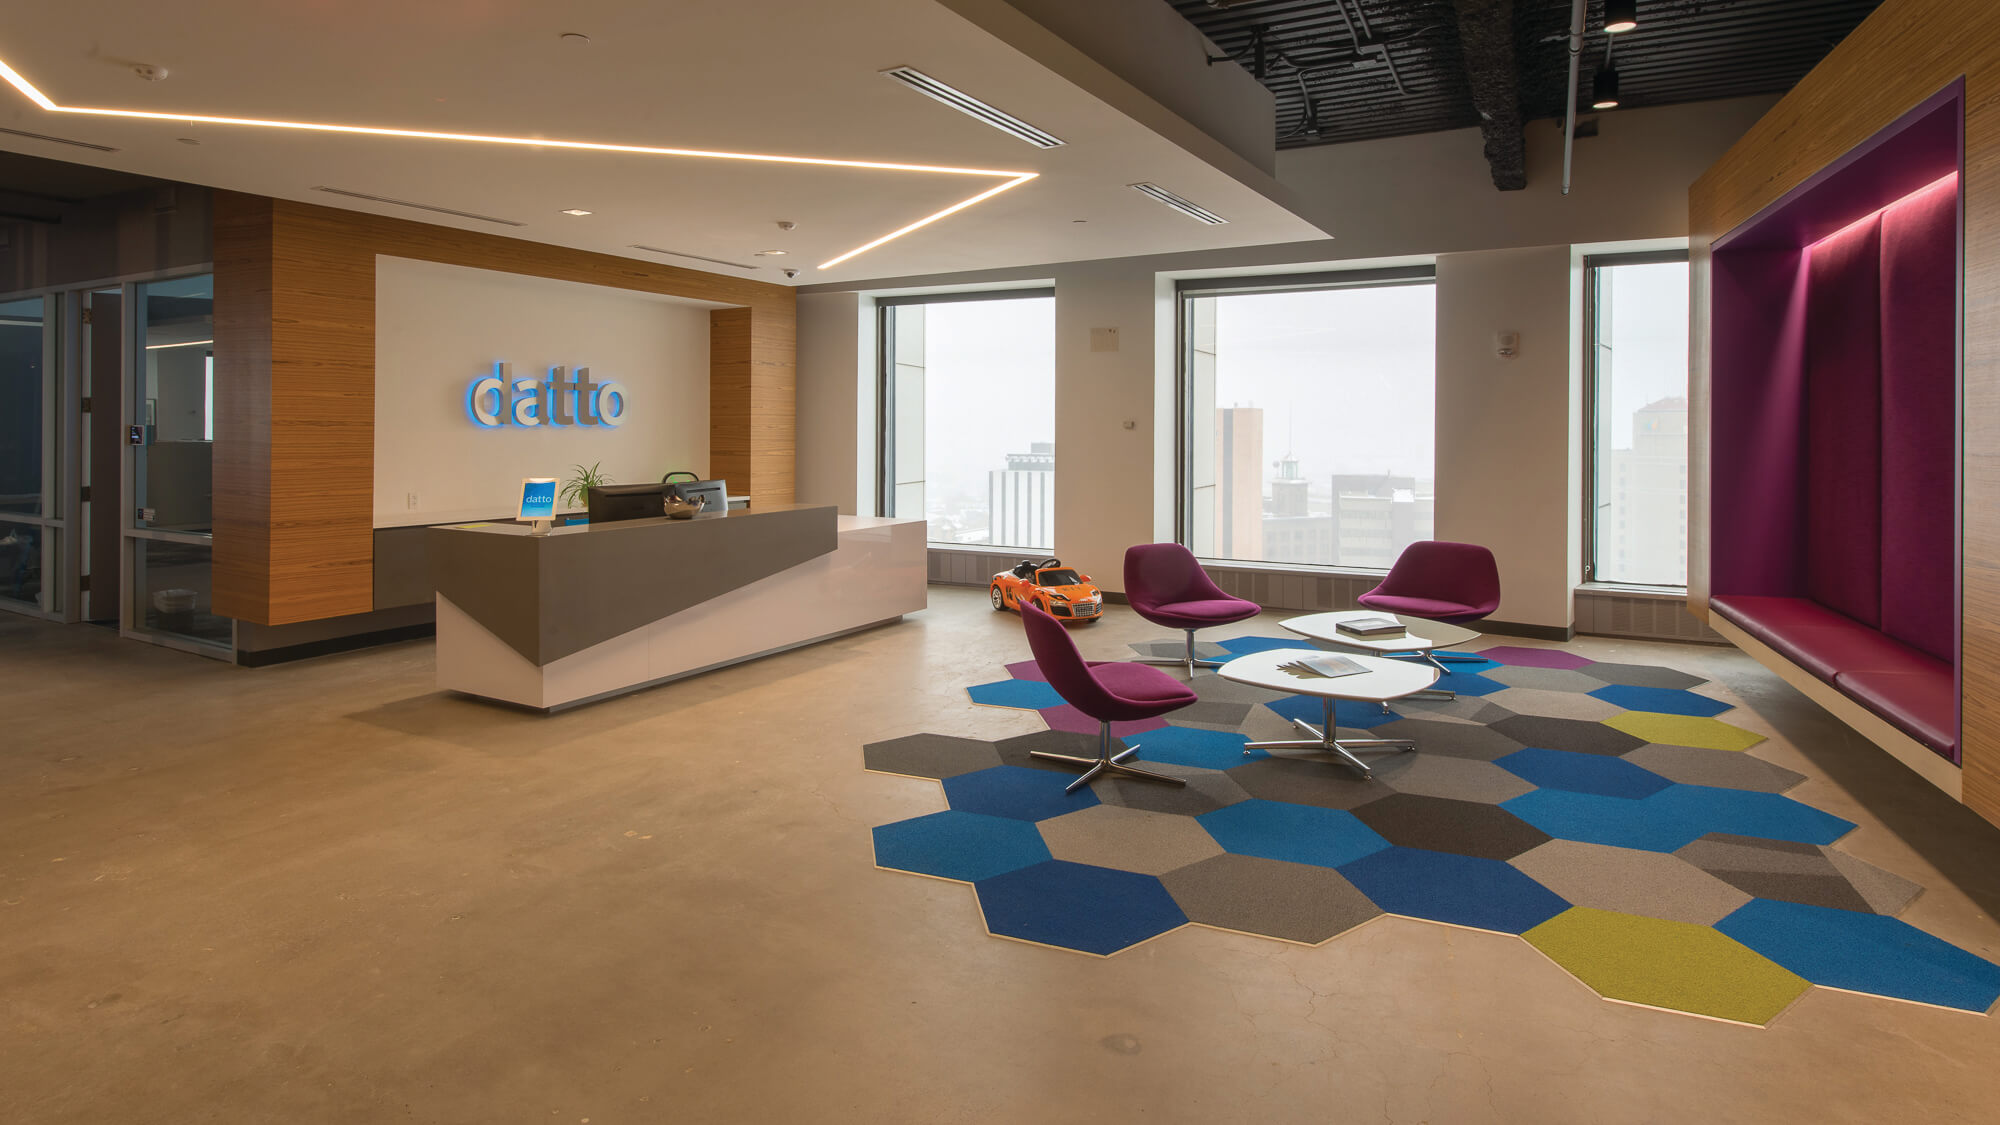 Datto moves forward in a big way